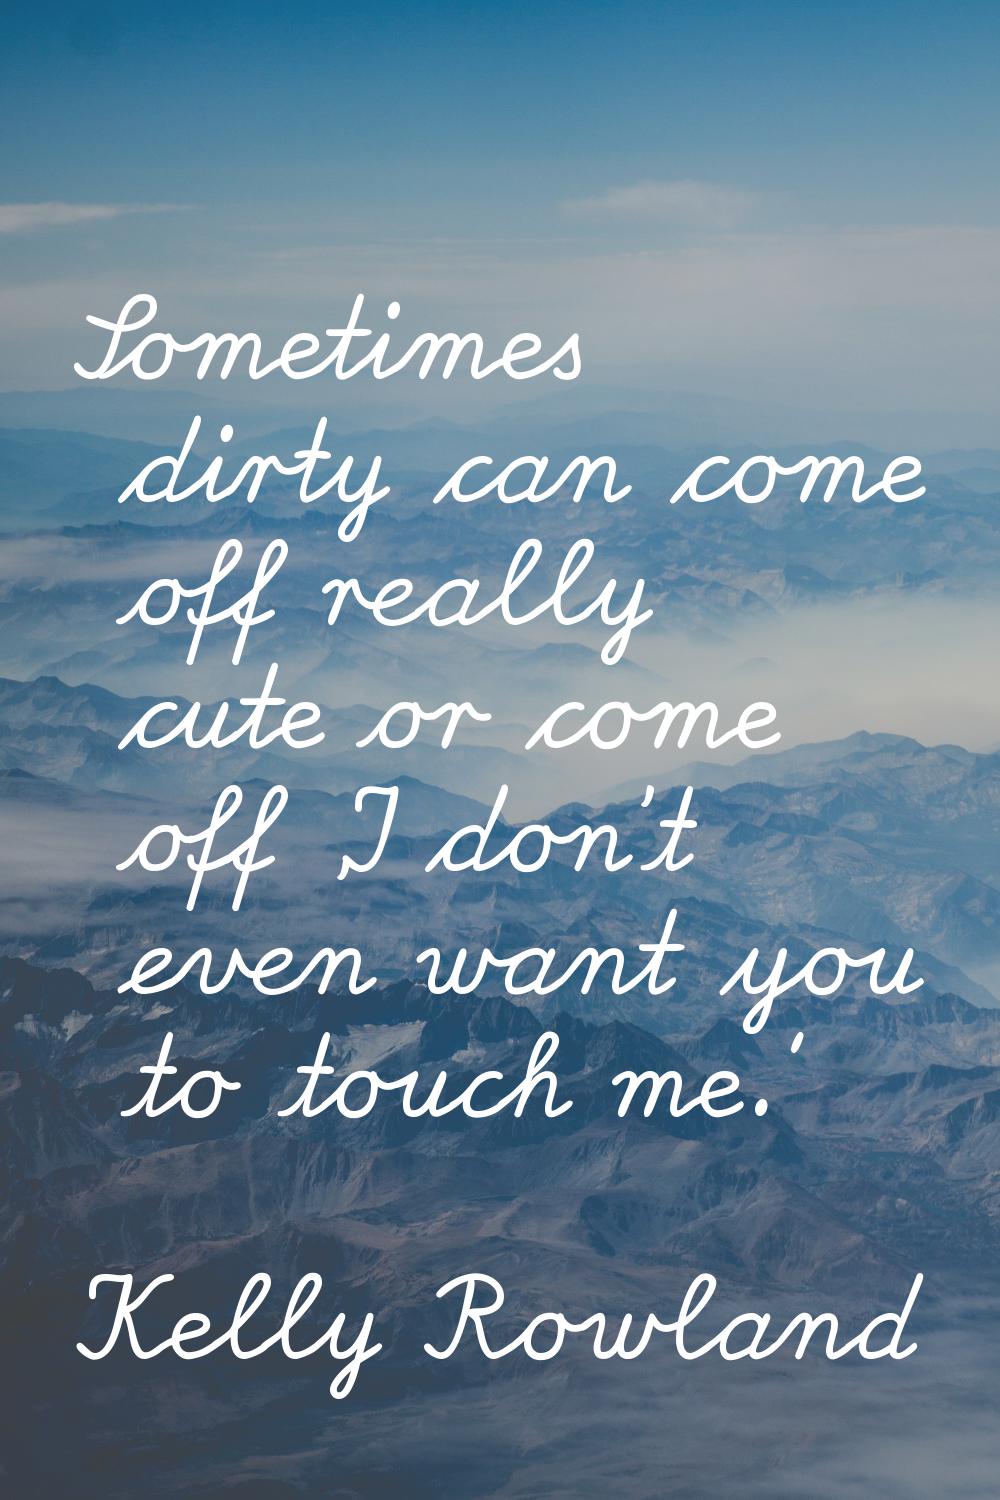 Sometimes dirty can come off really cute or come off 'I don't even want you to touch me.'